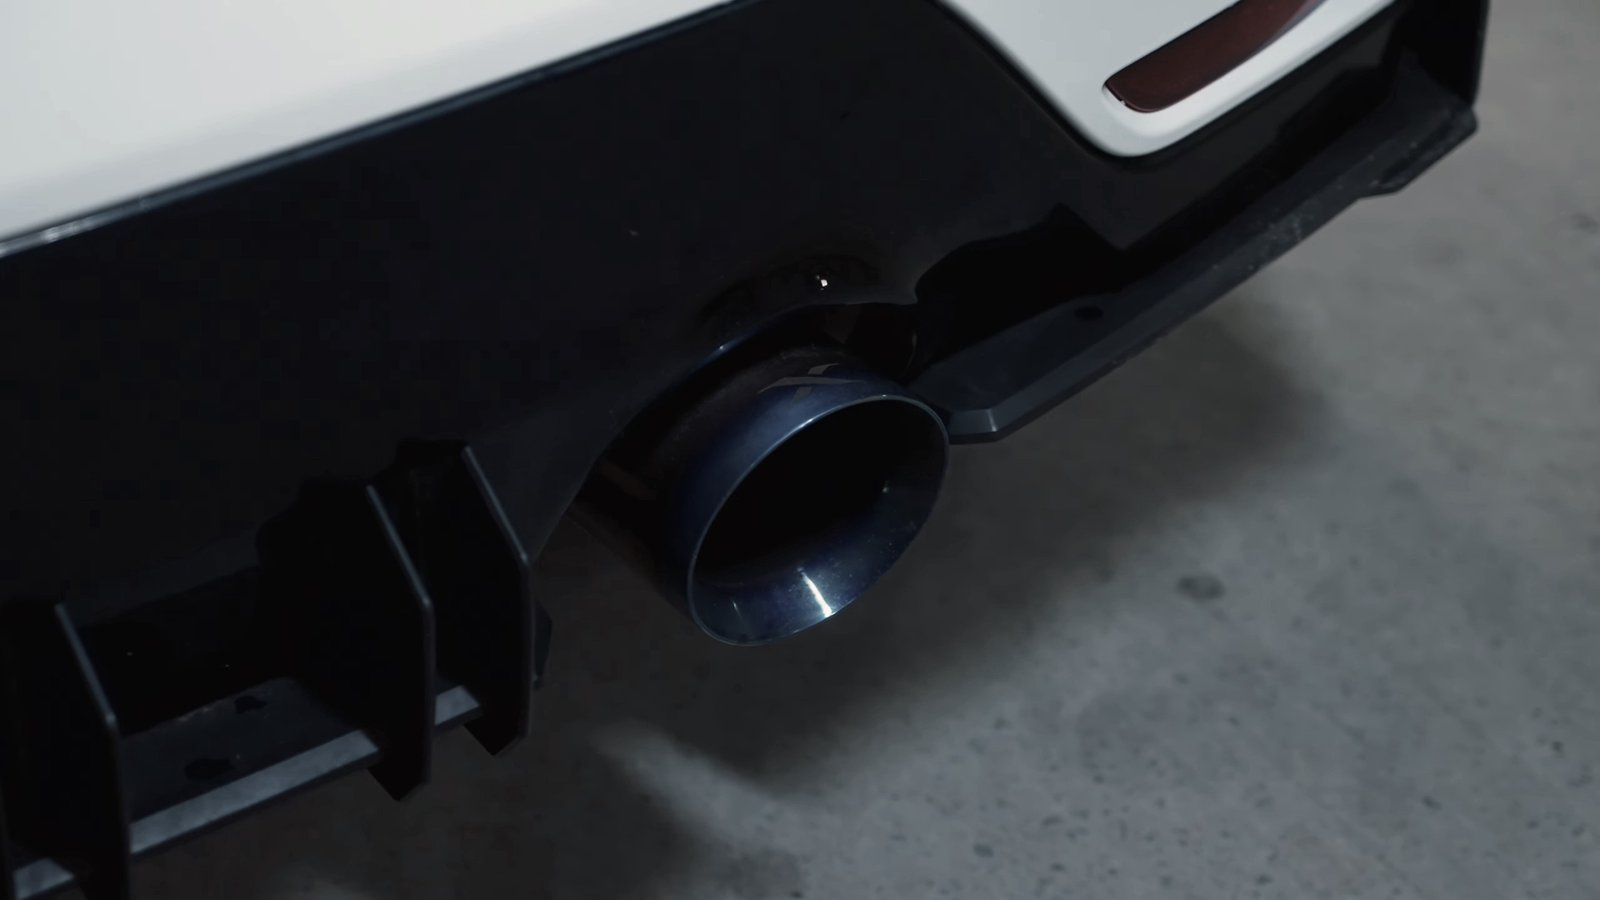 Stock vs. Aftermarket Exhausts: Why You Should Consider Upgrading